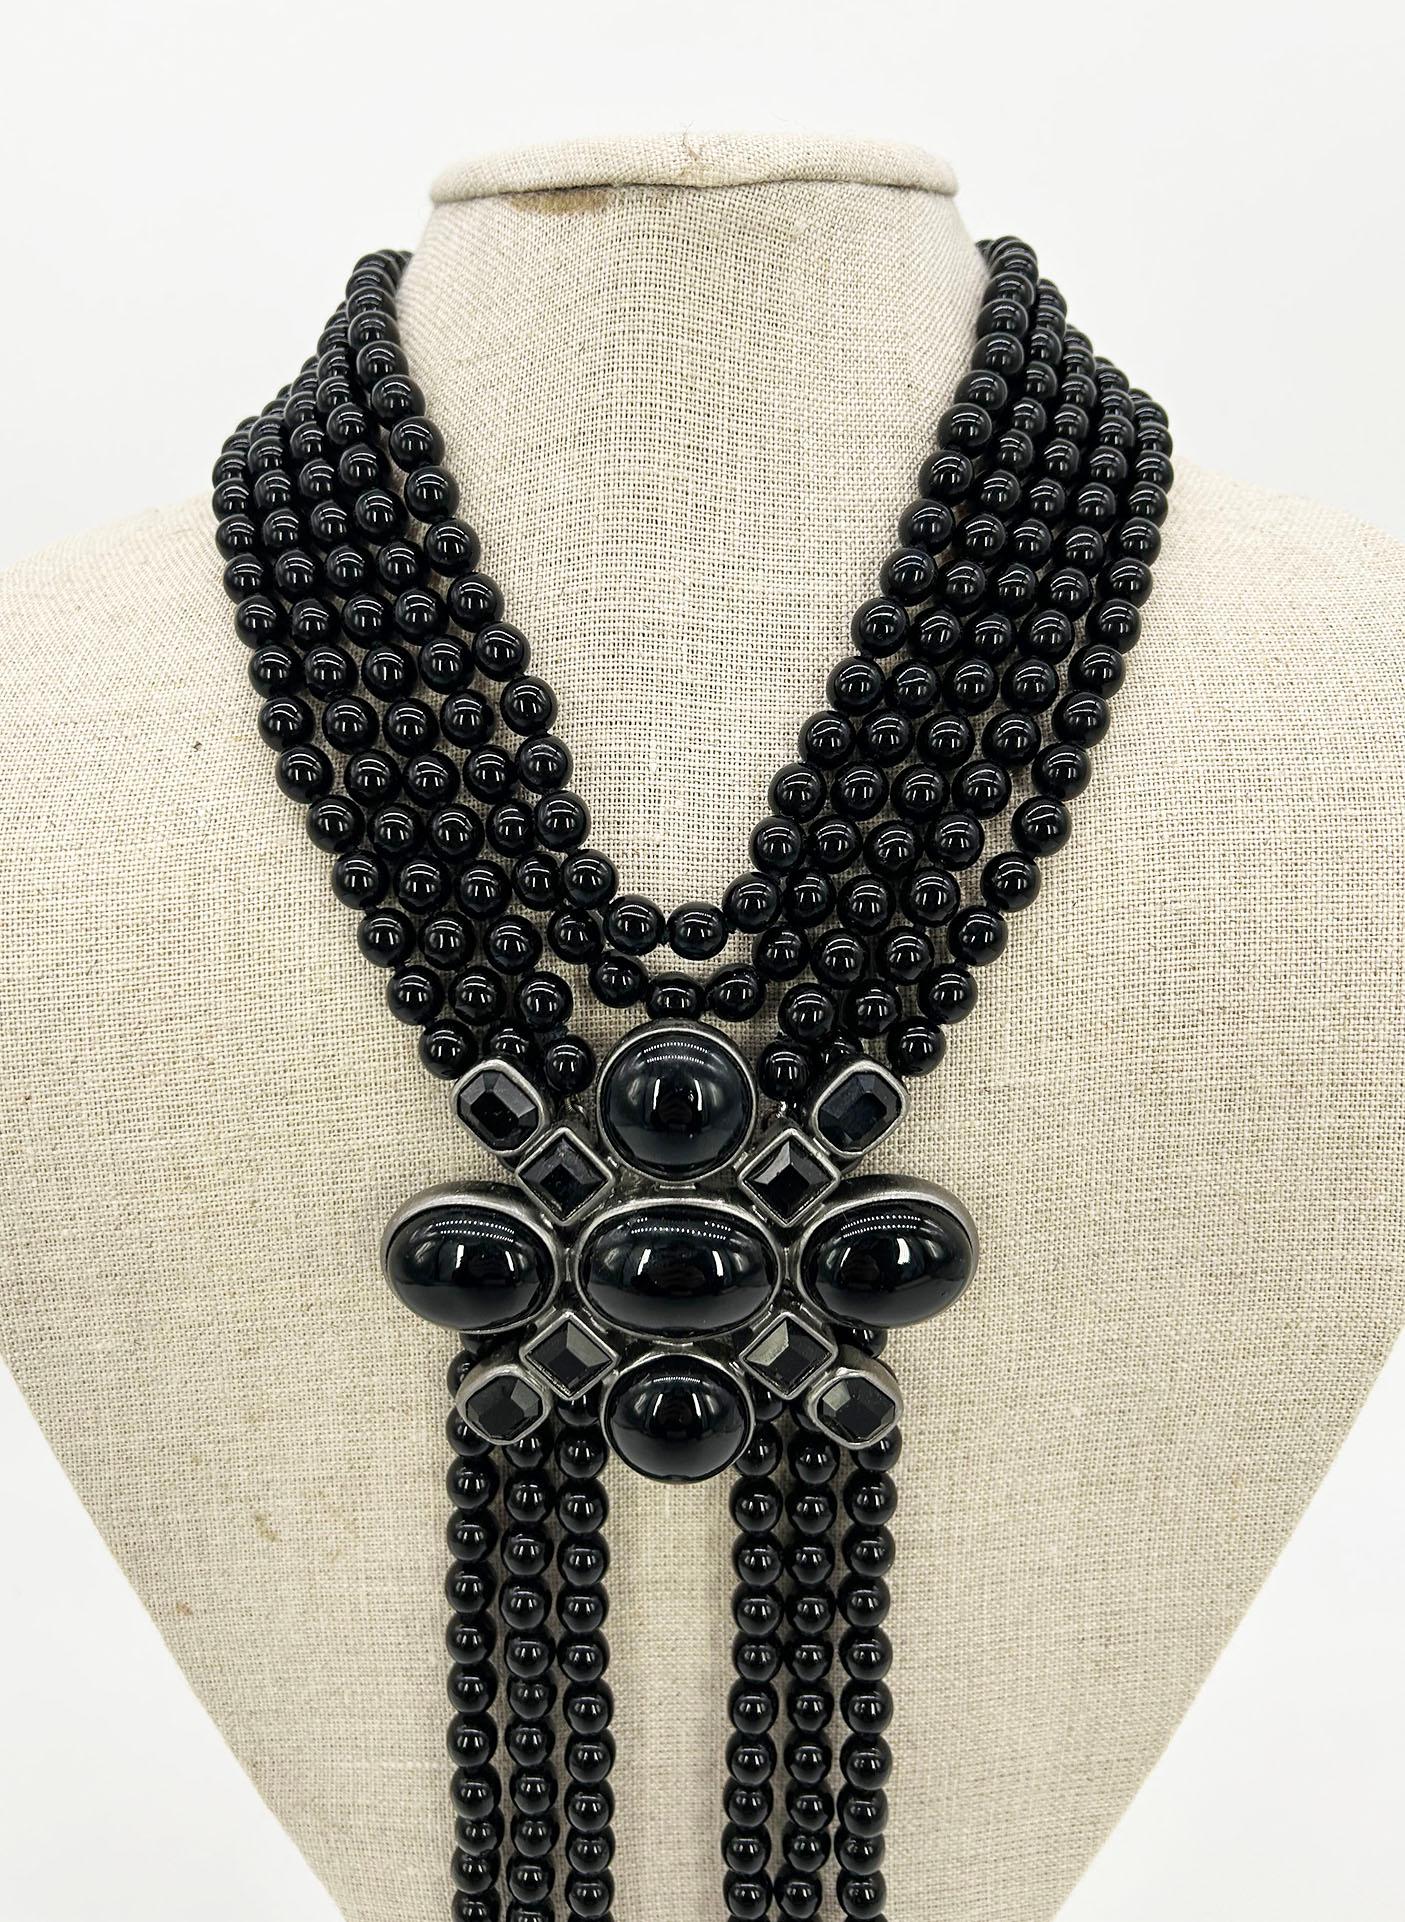 Chanel Black Beaded Multi Strand Emblem Necklace in excellent condition. Black beads with silver hardware. Black gripoix center embellishment. Top part of necklace features 5 rows of beads while bottom (under center emblem) features 3 rows. Double